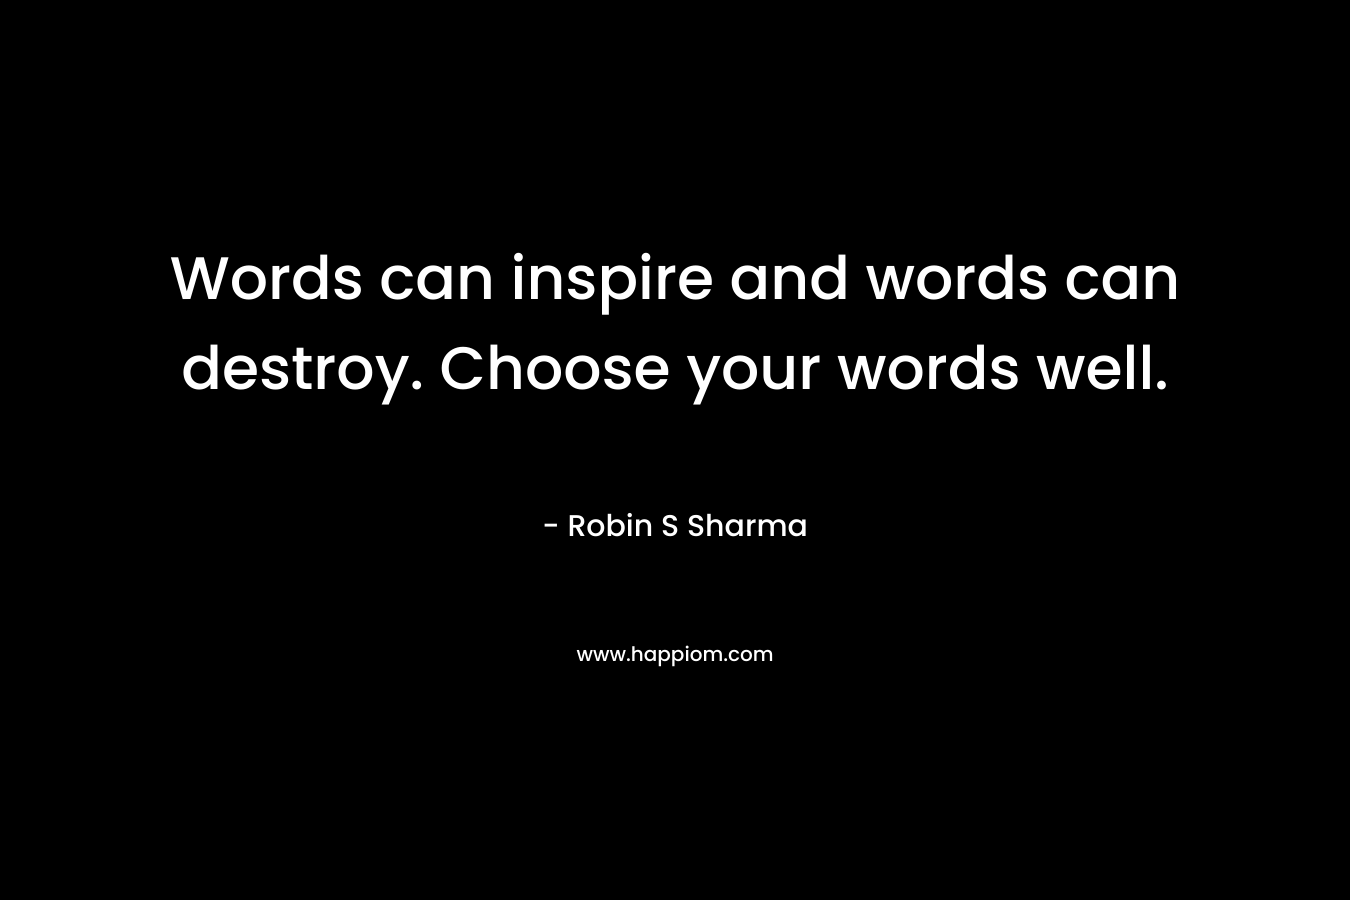 Words can inspire and words can destroy. Choose your words well. – Robin S Sharma